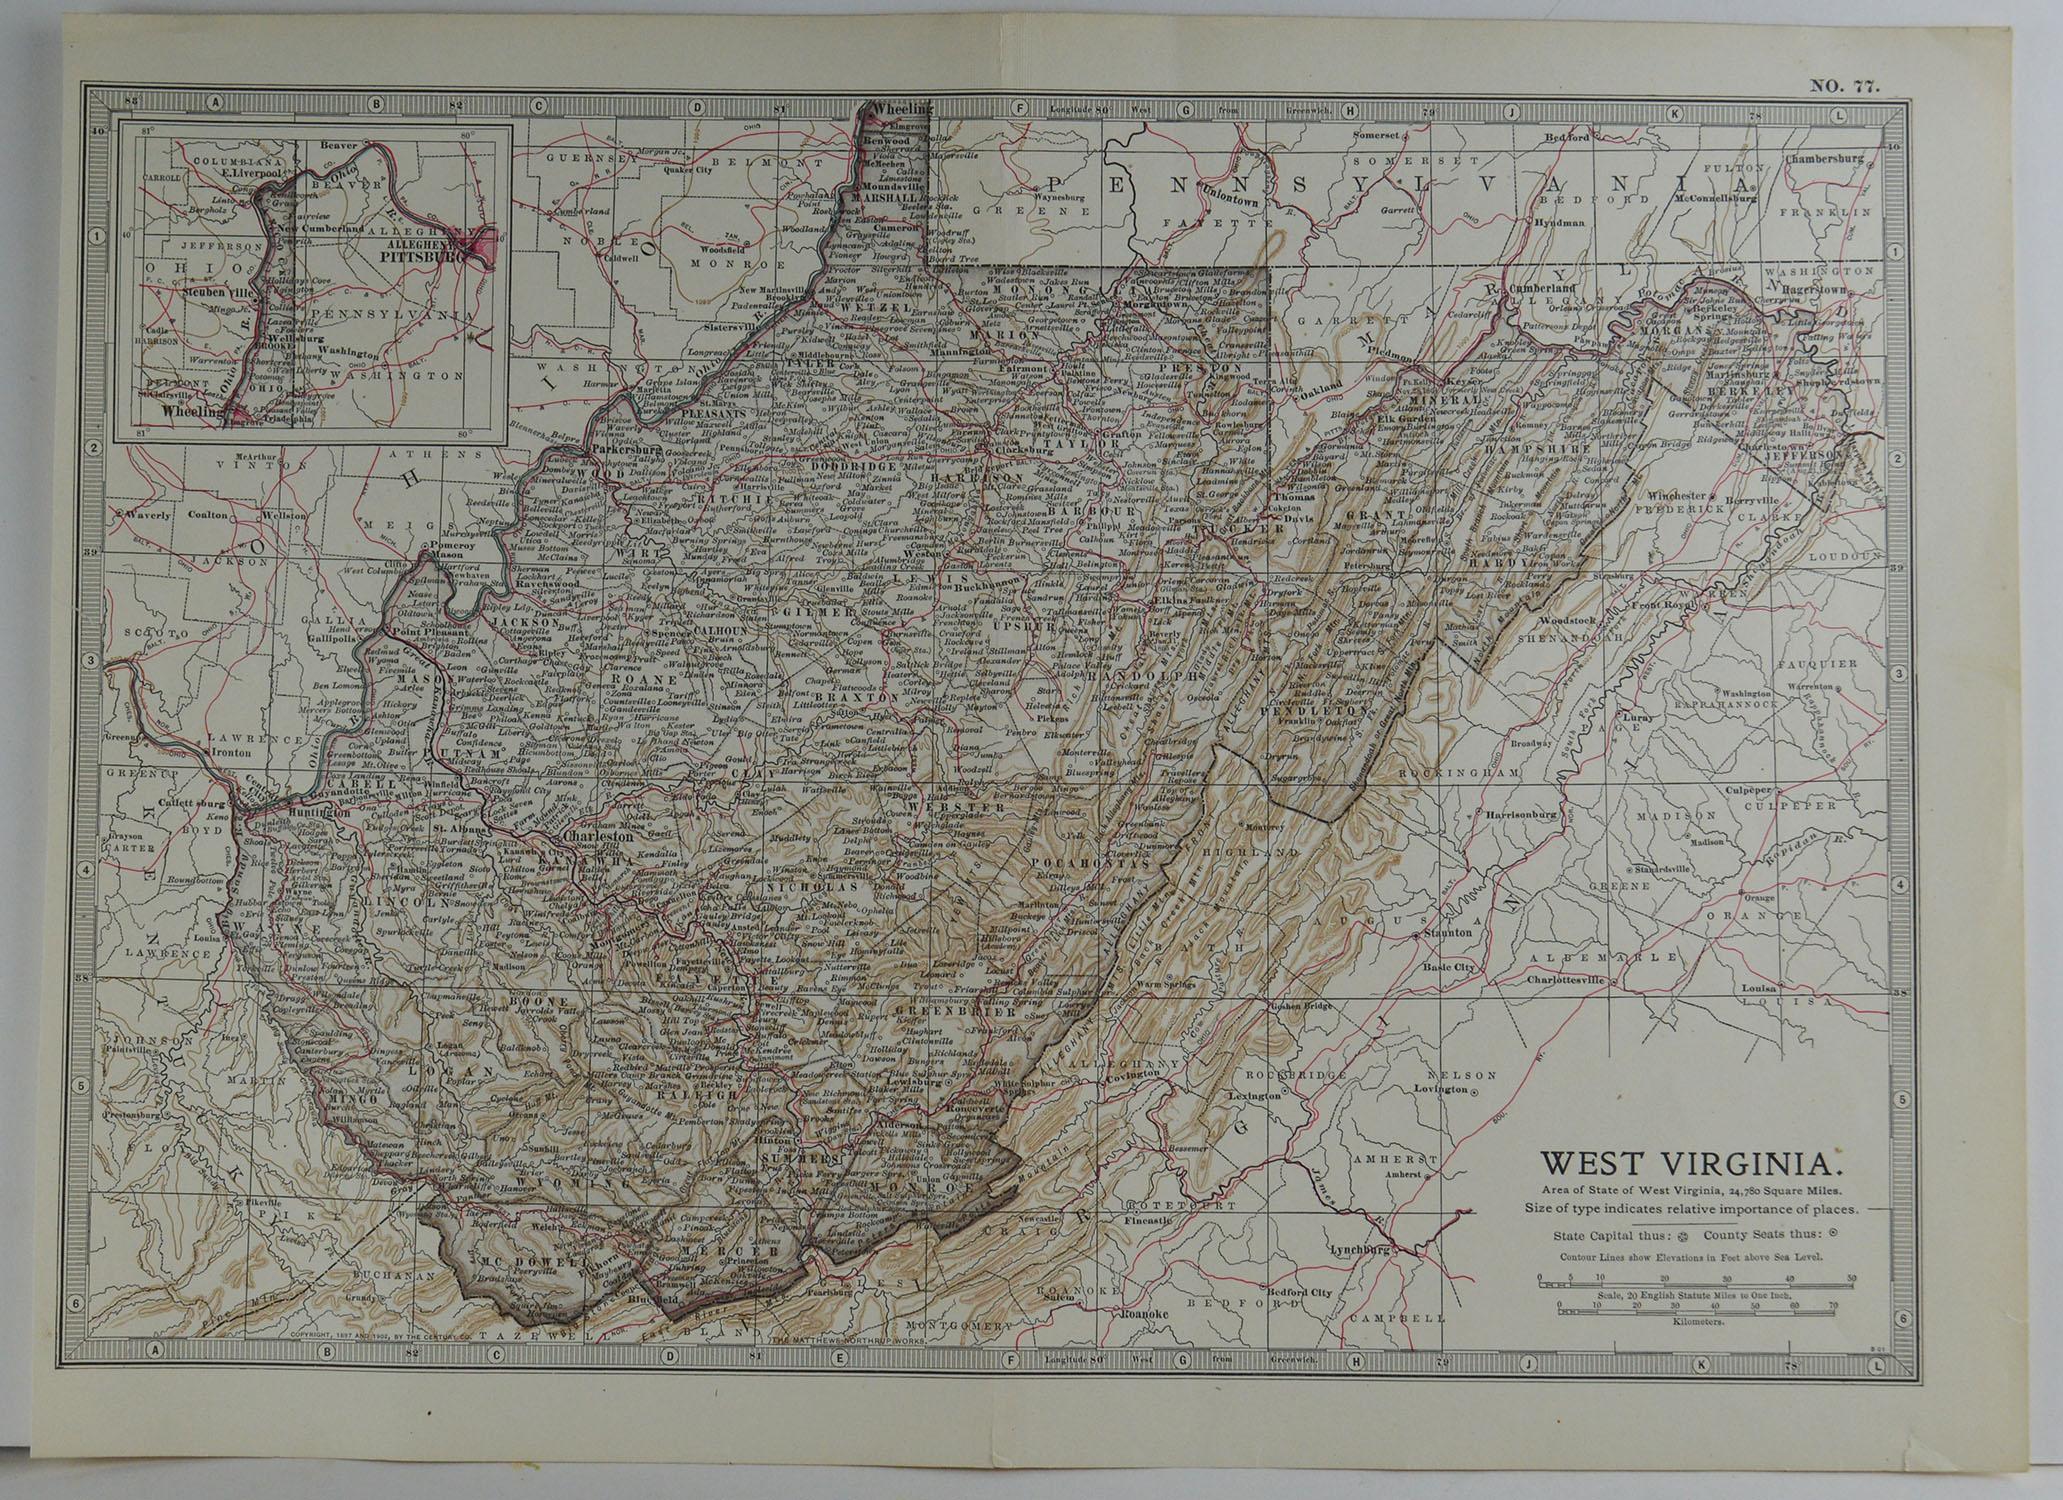 Great map of West Virginia

Original color.

Published, circa 1890

Repairs to a couple of minor edge tears

Unframed.
  